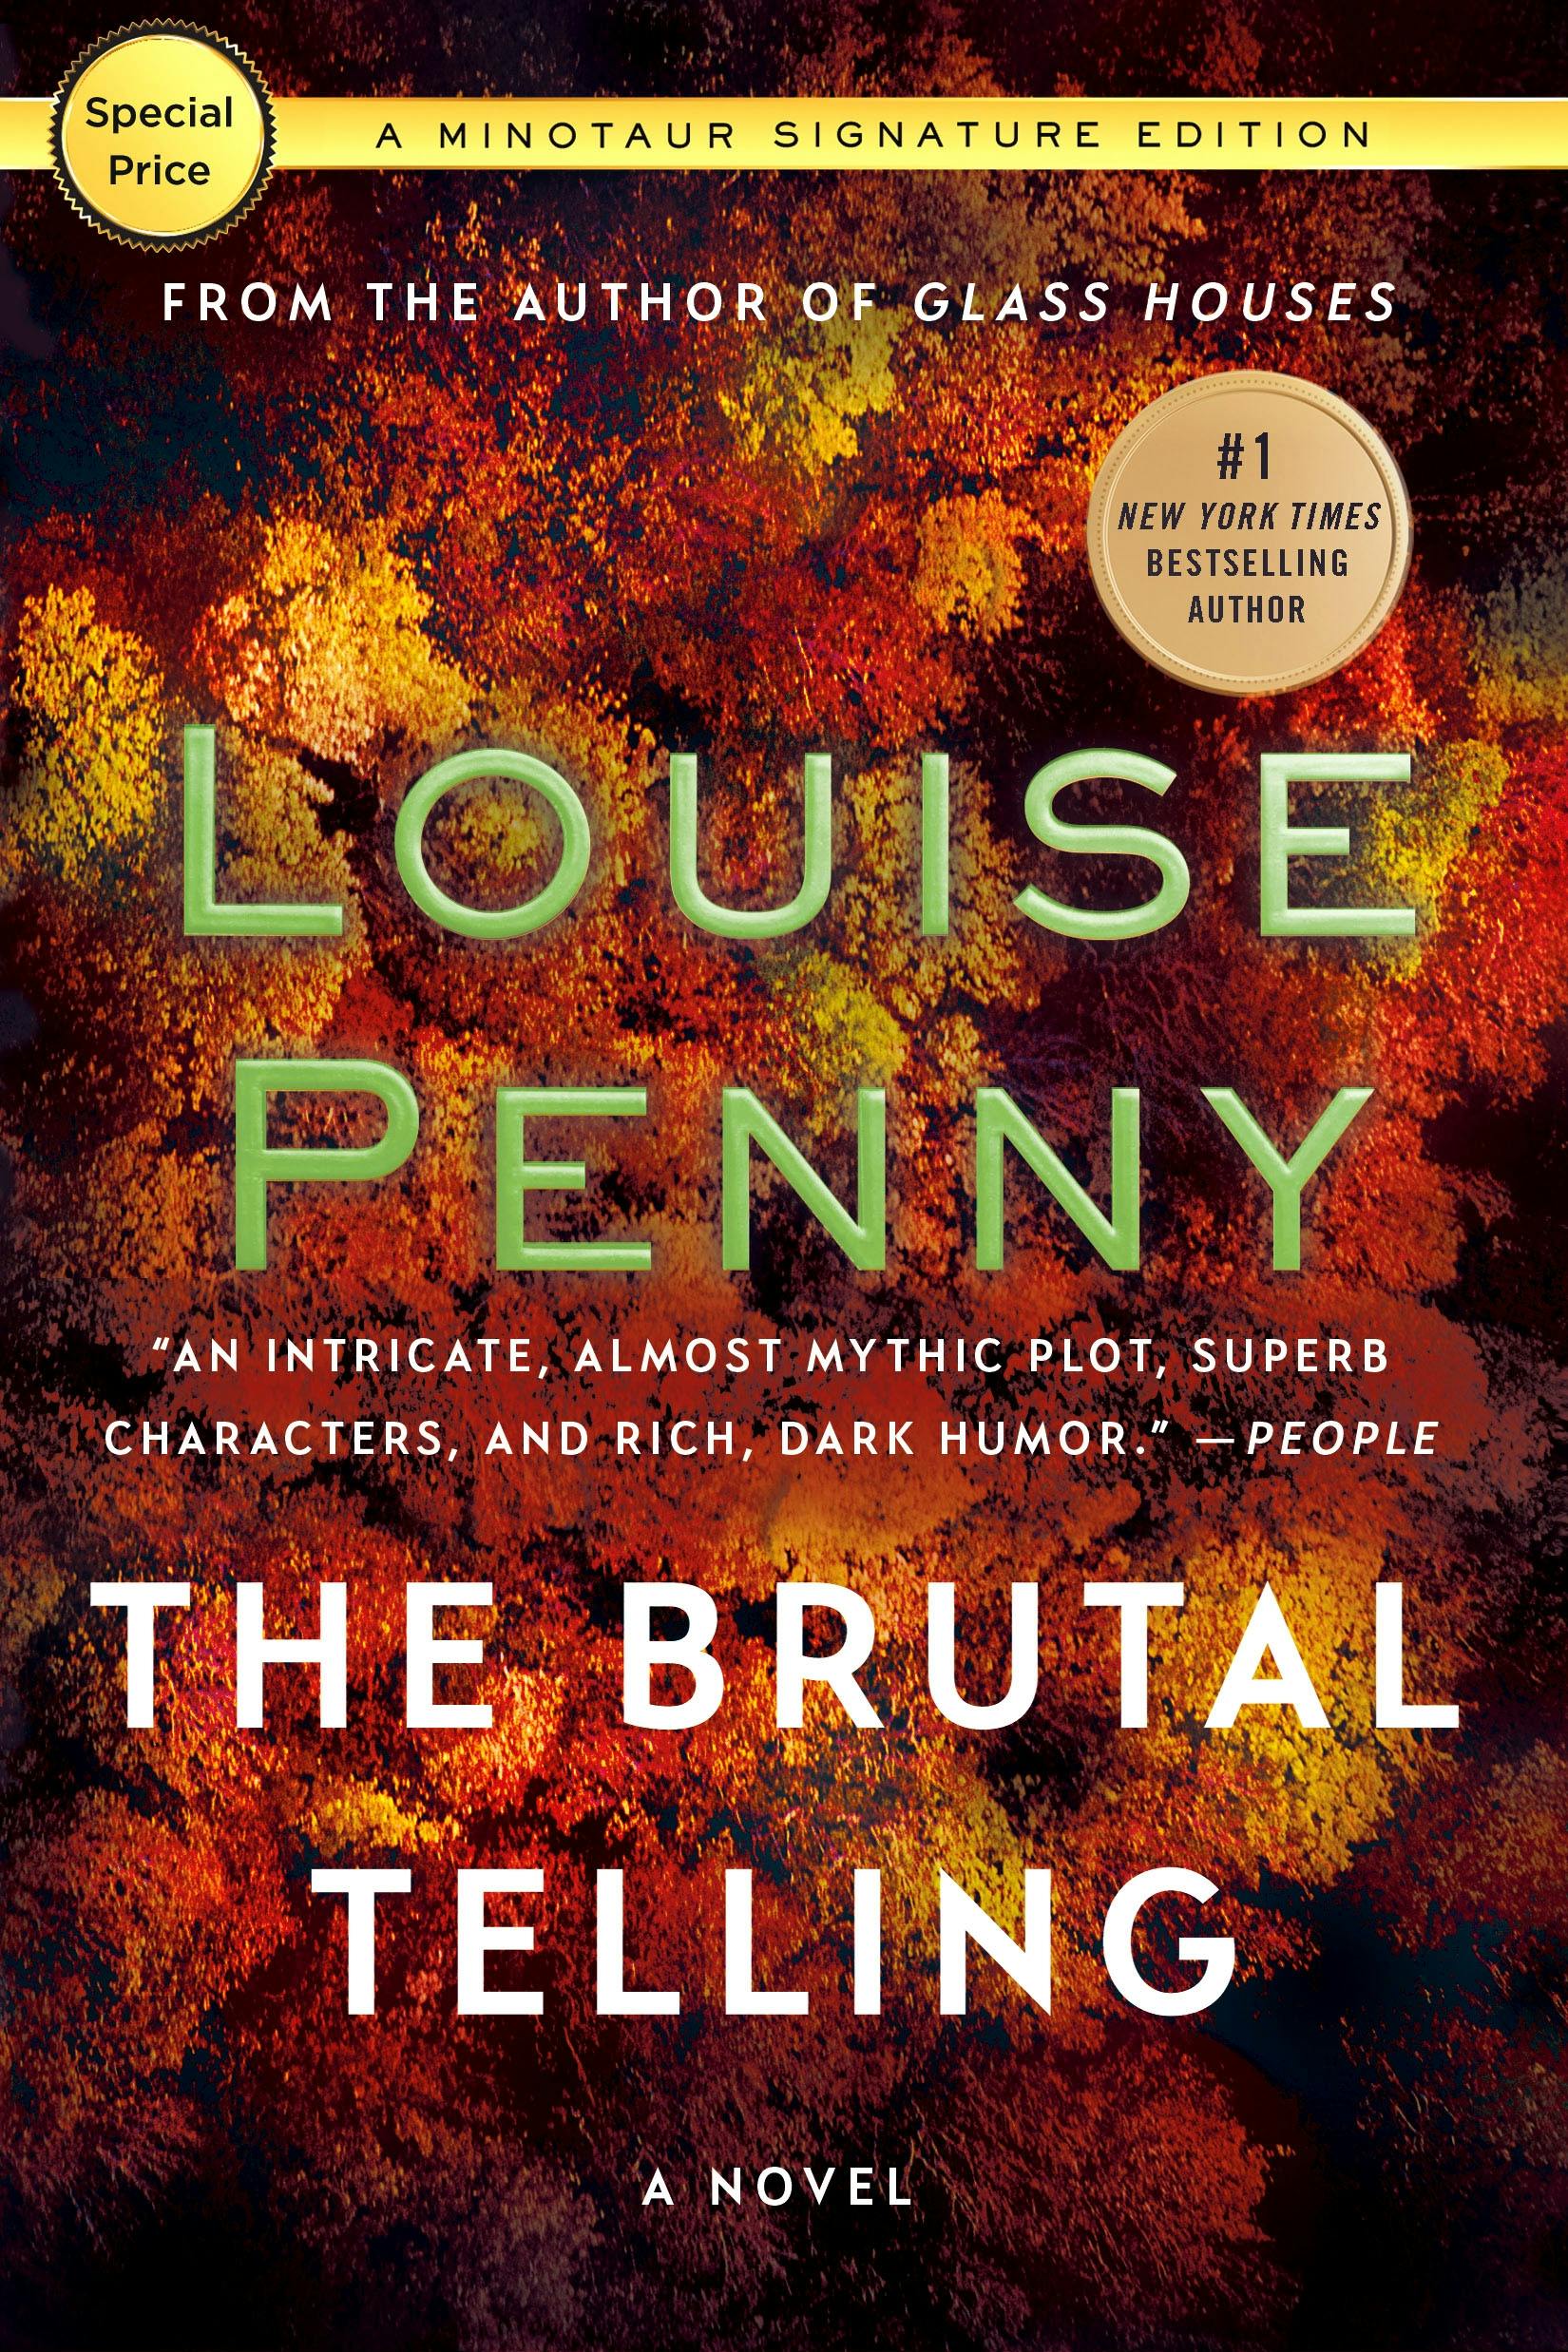 Chief Inspector Gamache 3 Books Collection Set by Louise Penny (still Life, Dead Cold, The Cruellest Month)